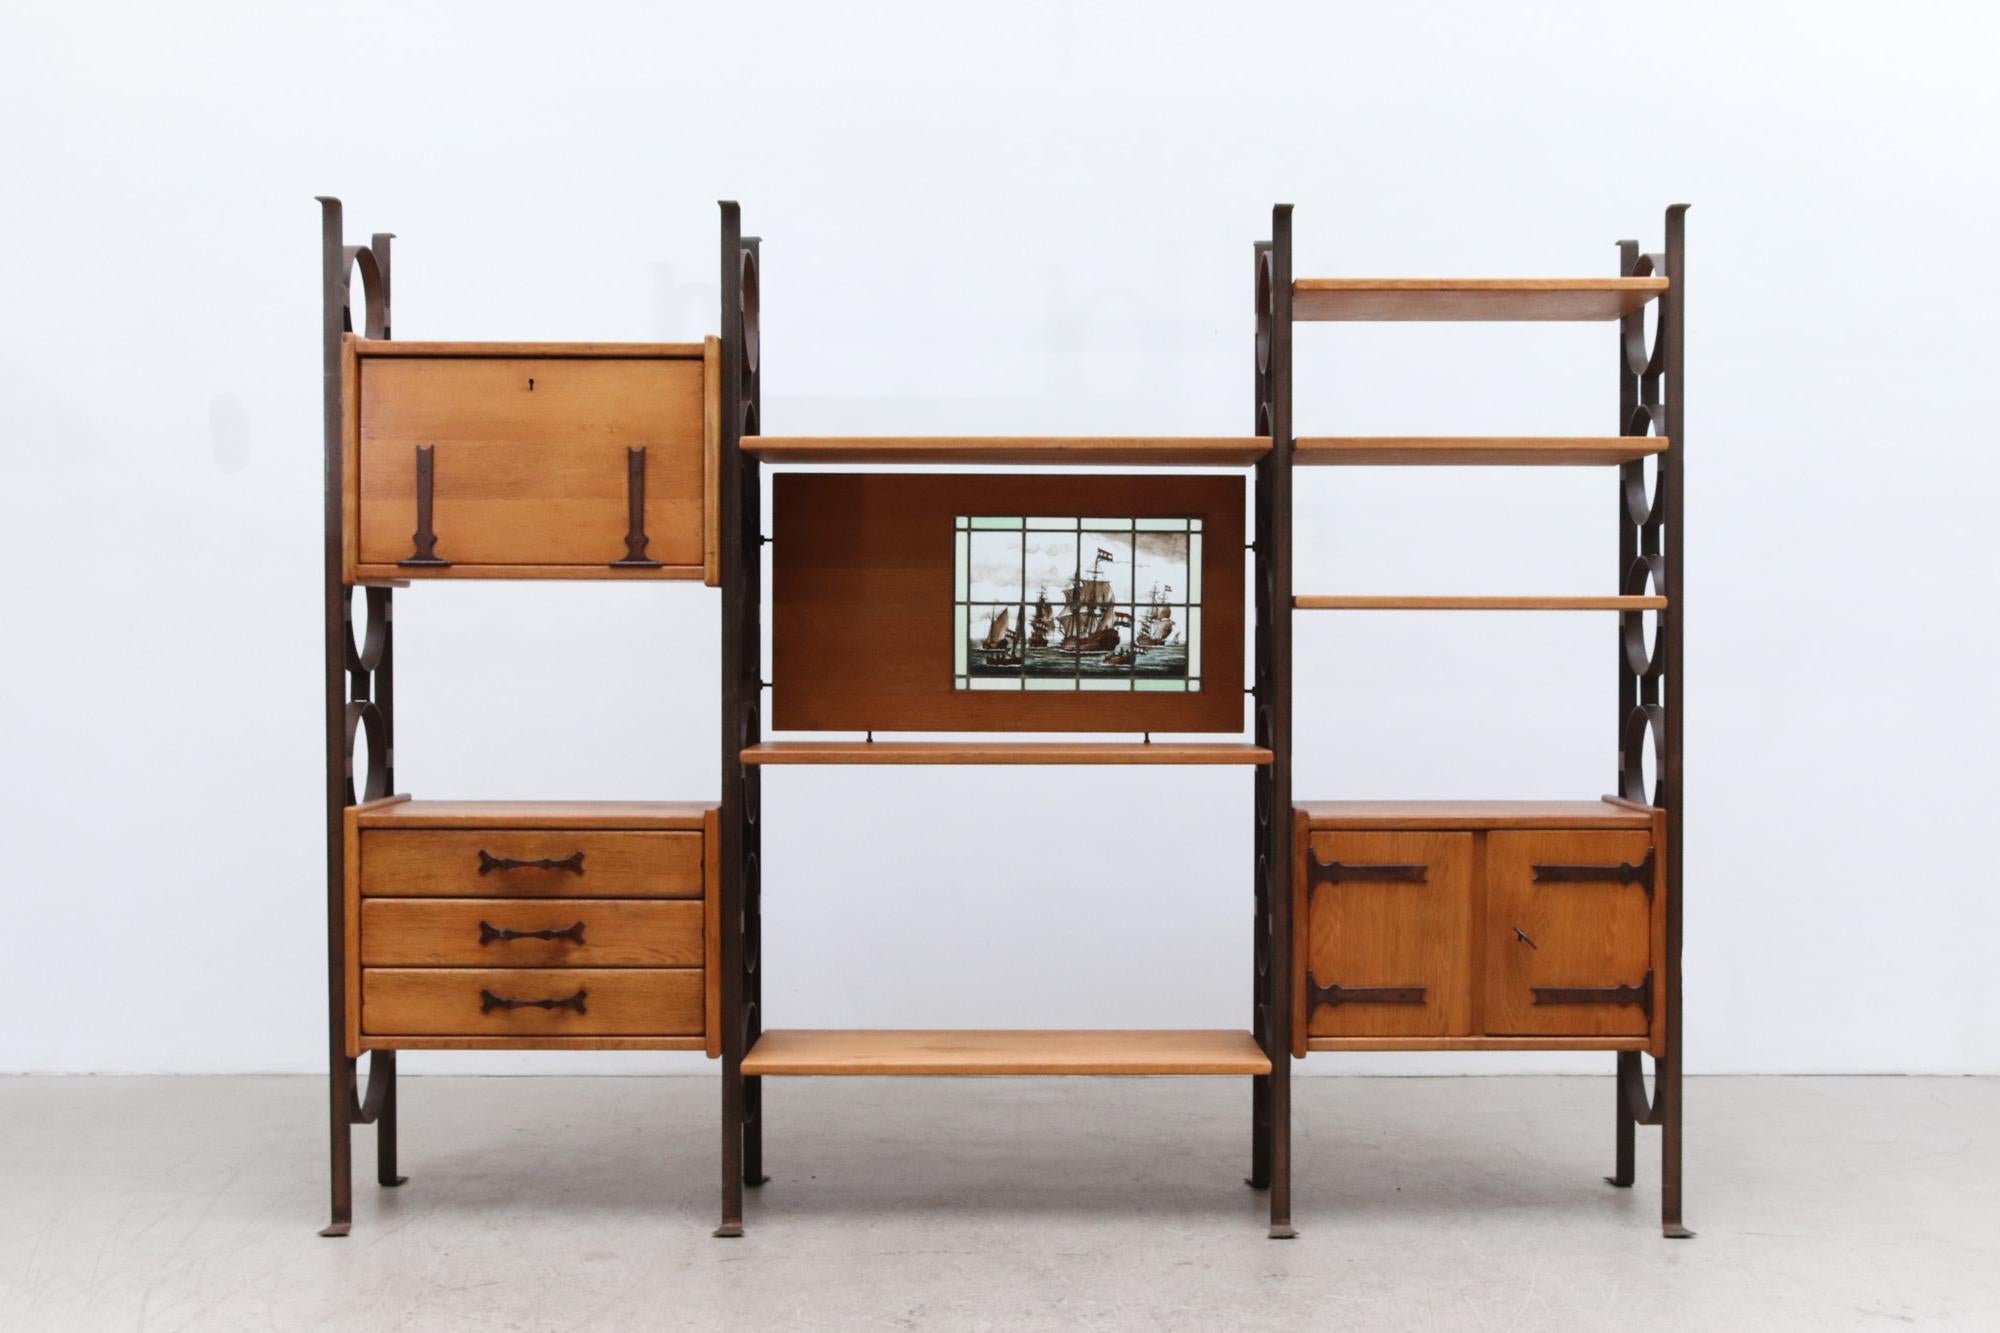 Stunning 3 section brutalist solid oak and iron room divider storage unit with adjustable shelves, cabinets, and panels. Middle section is 39.5